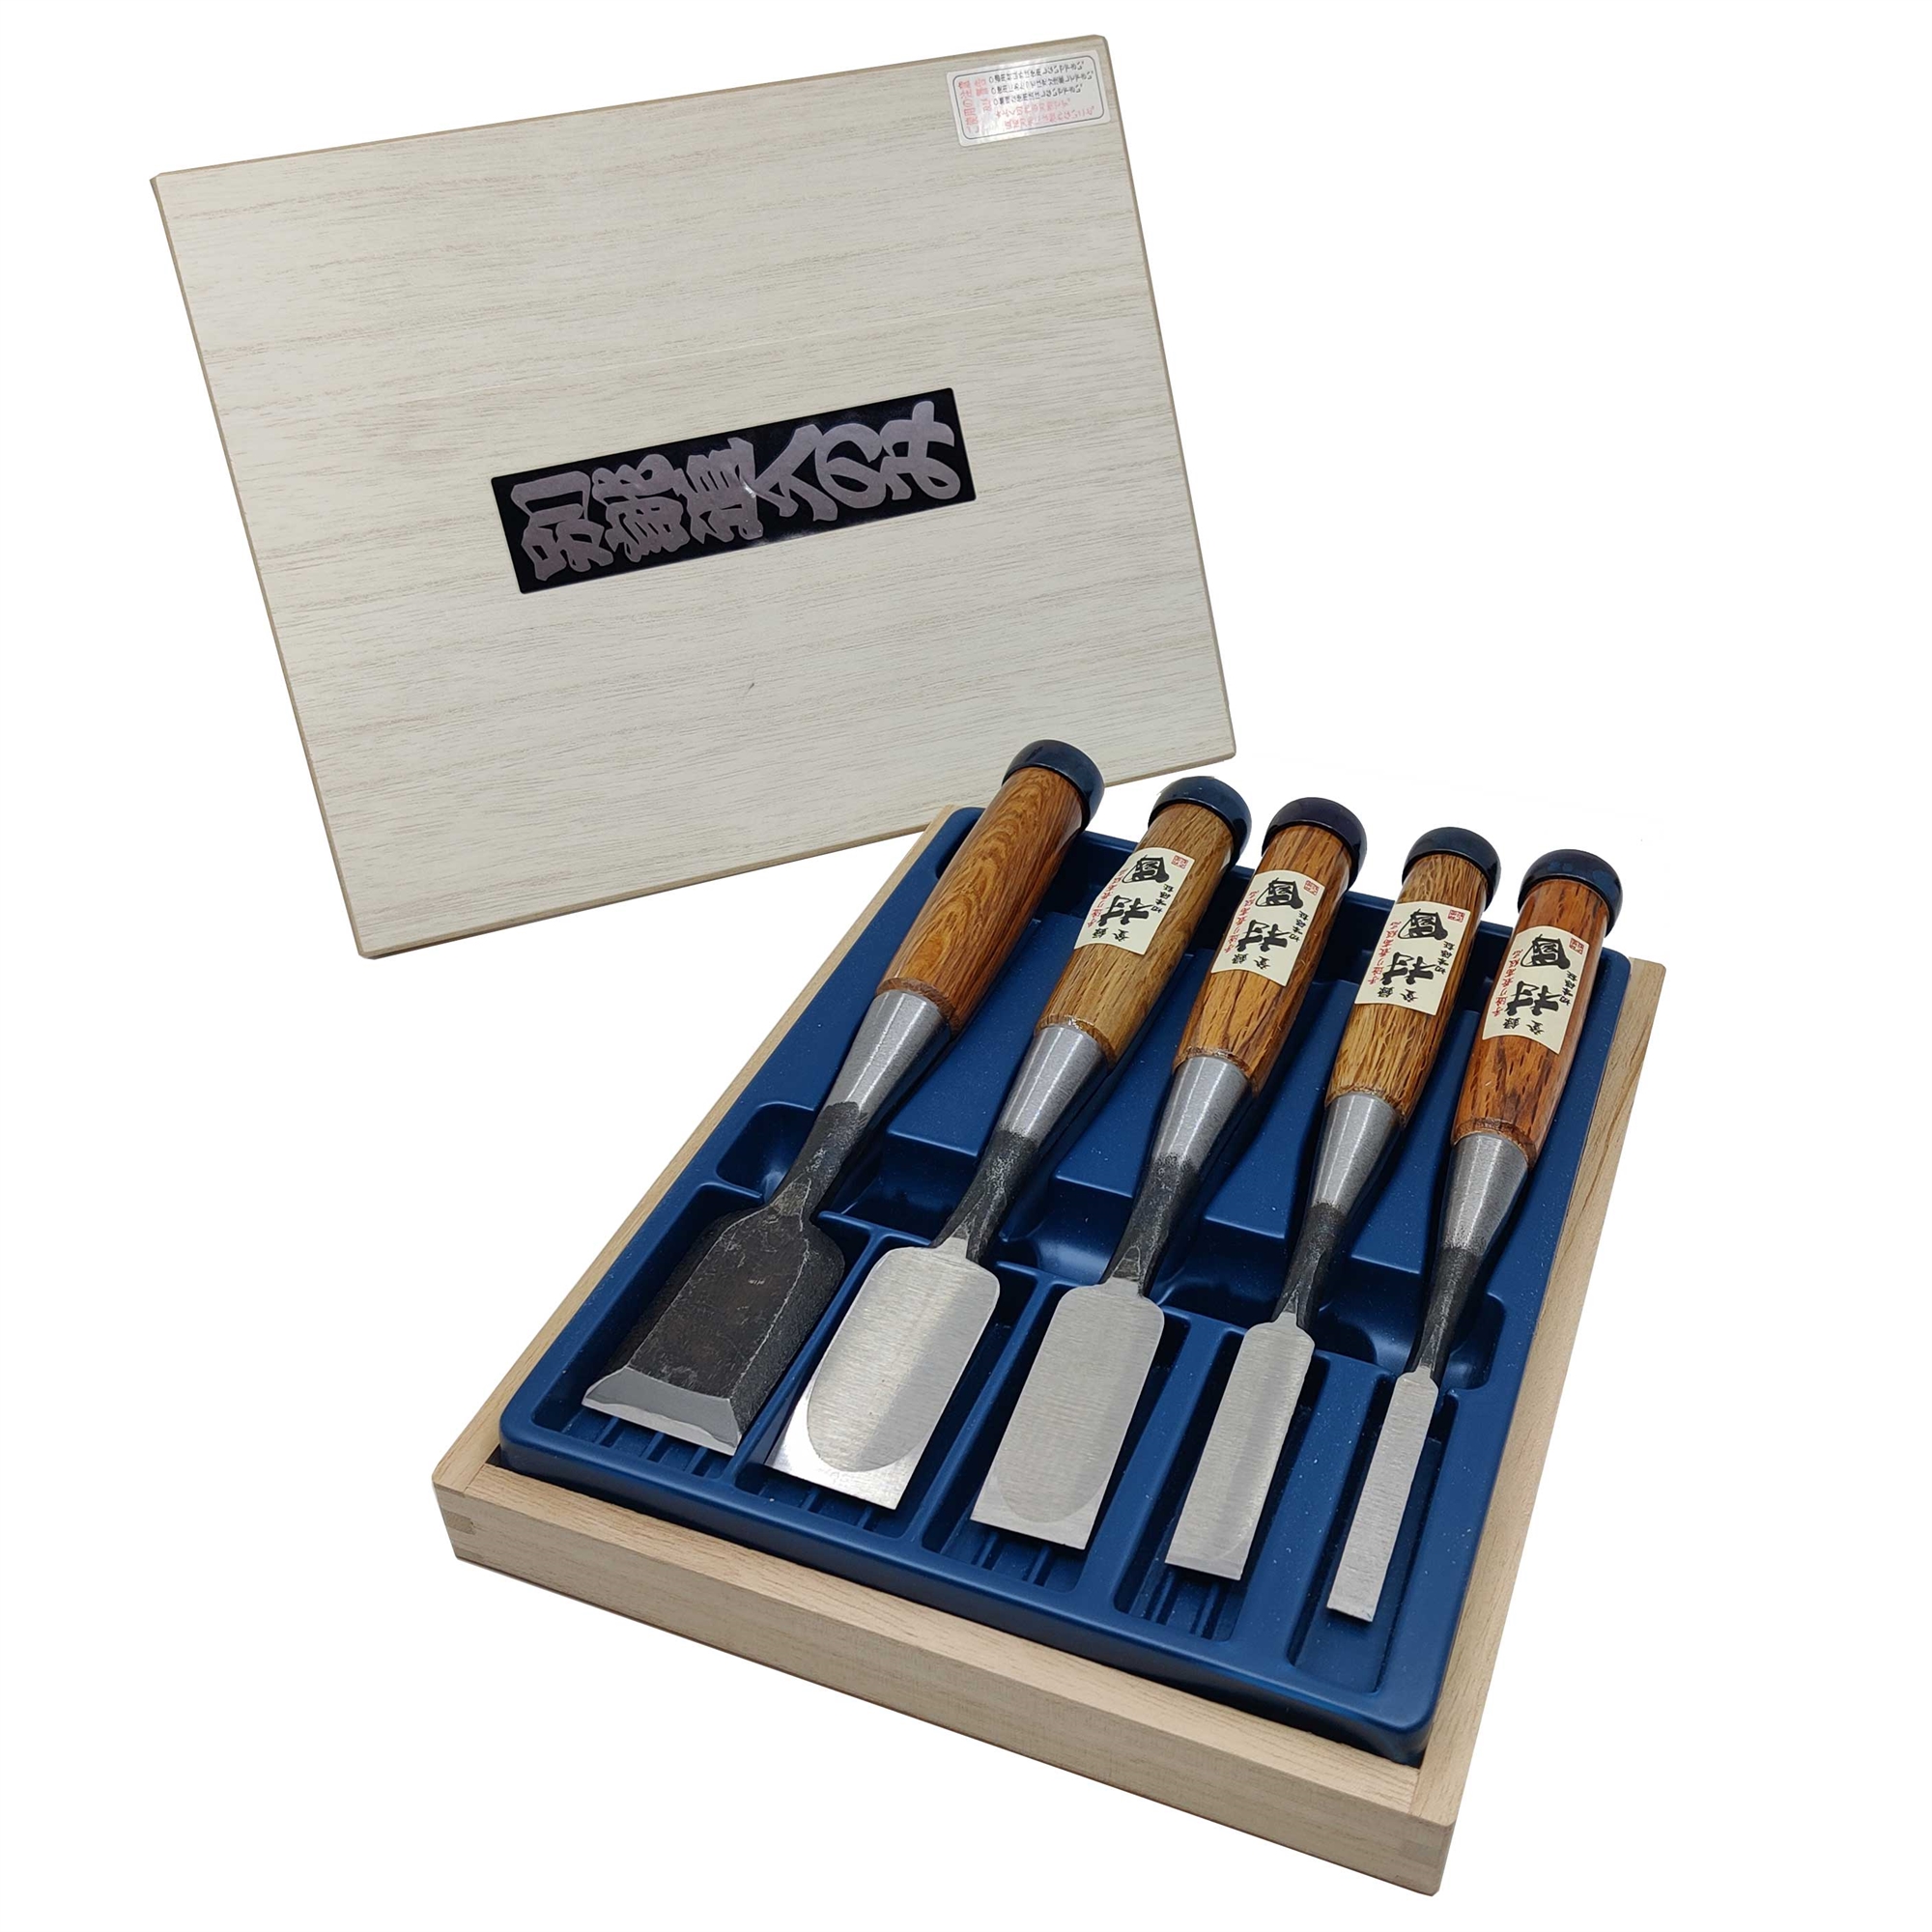 Japanese Carving Tools Set of 5